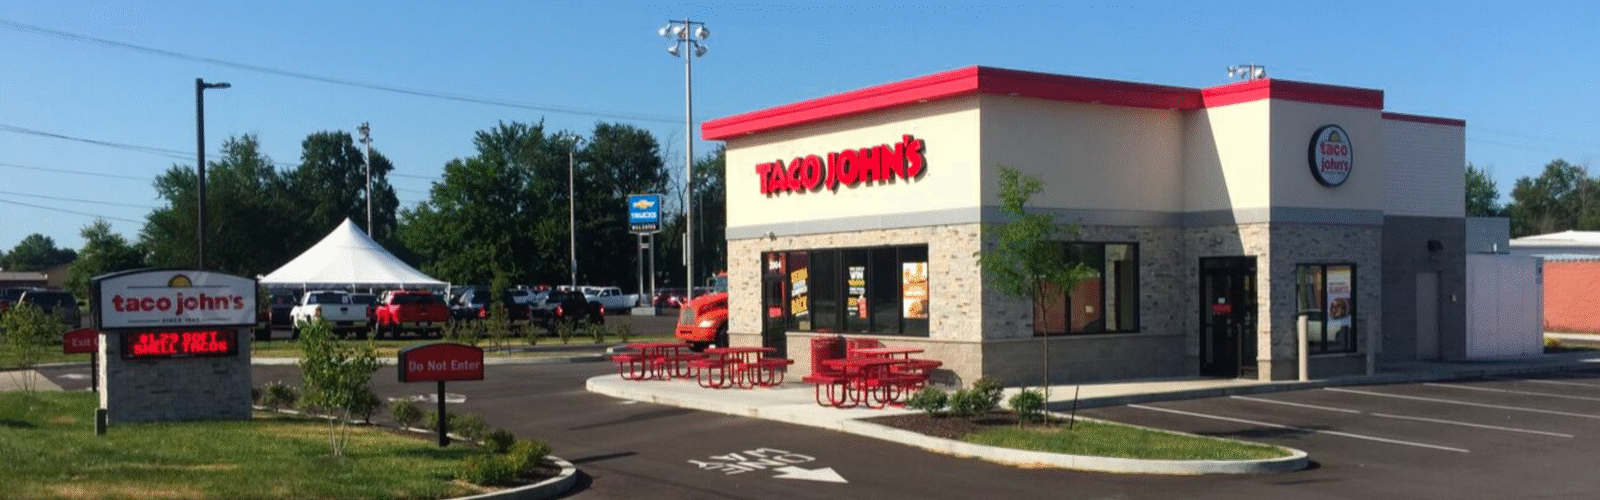 2-Specific Property Page - Taco John's - new